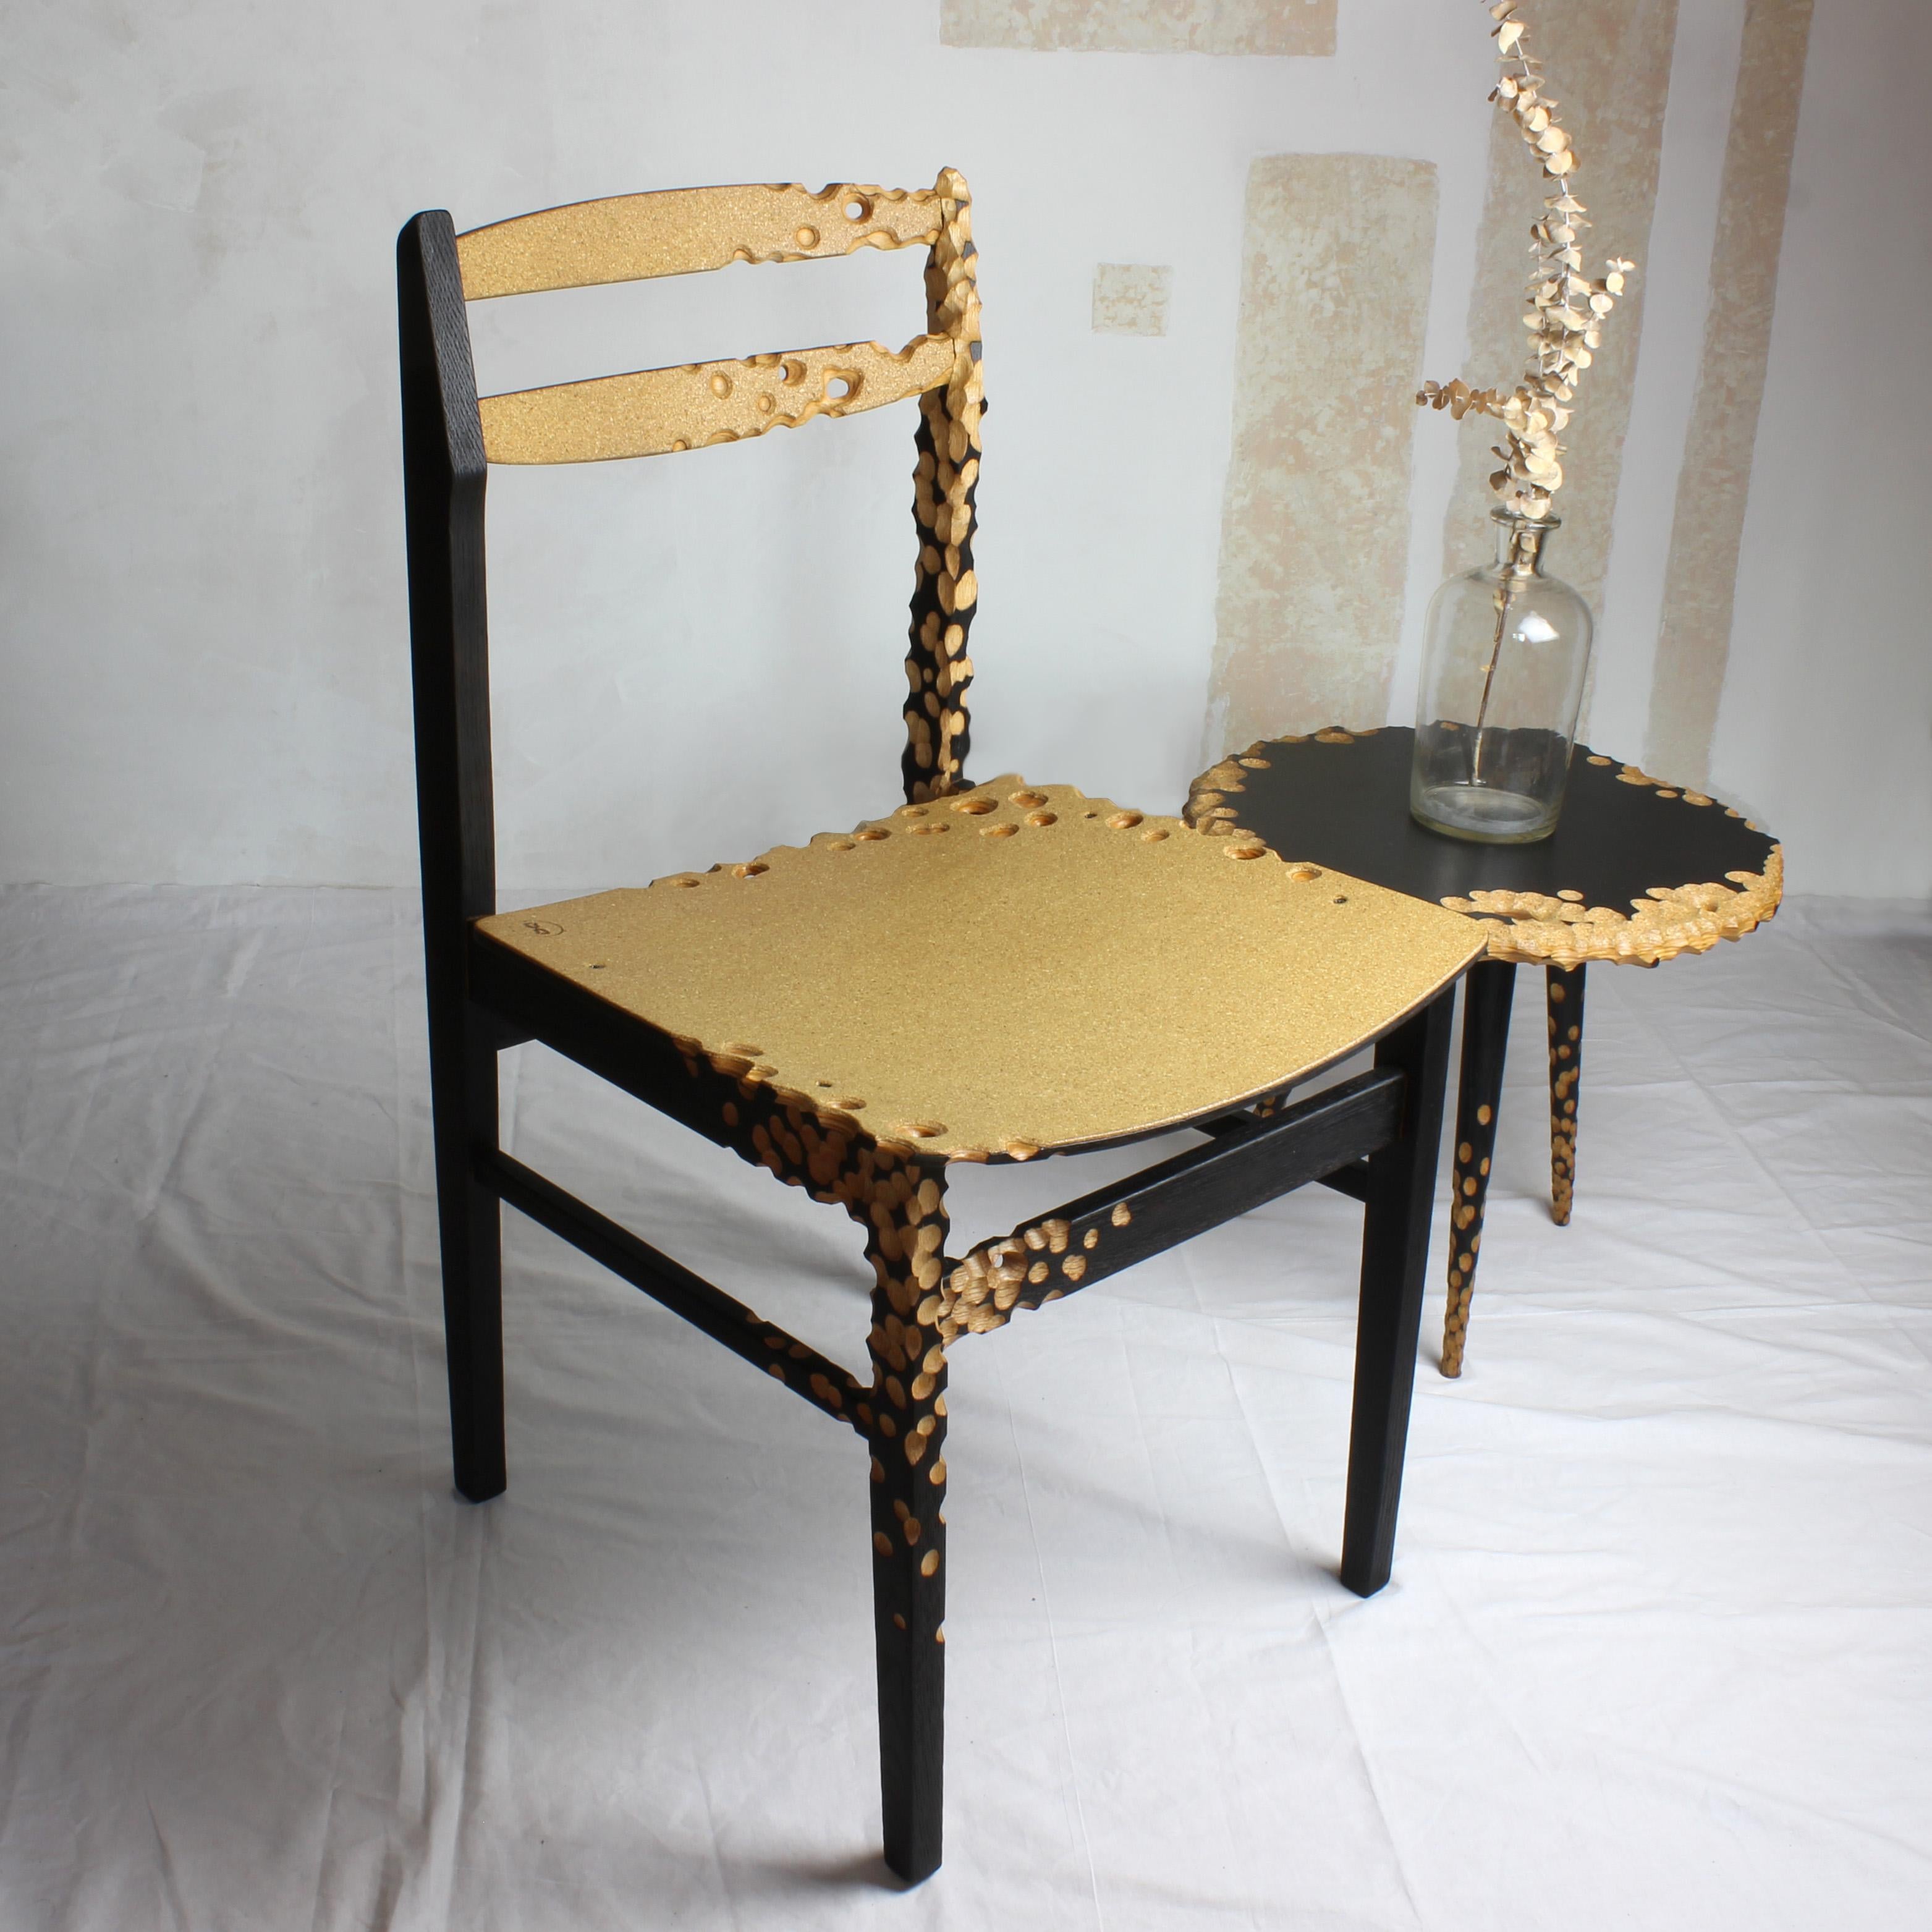 Post-Modern N1 Chair, Unique Sculptured, Charred Furniture, from Salvaged Chair and Cork For Sale